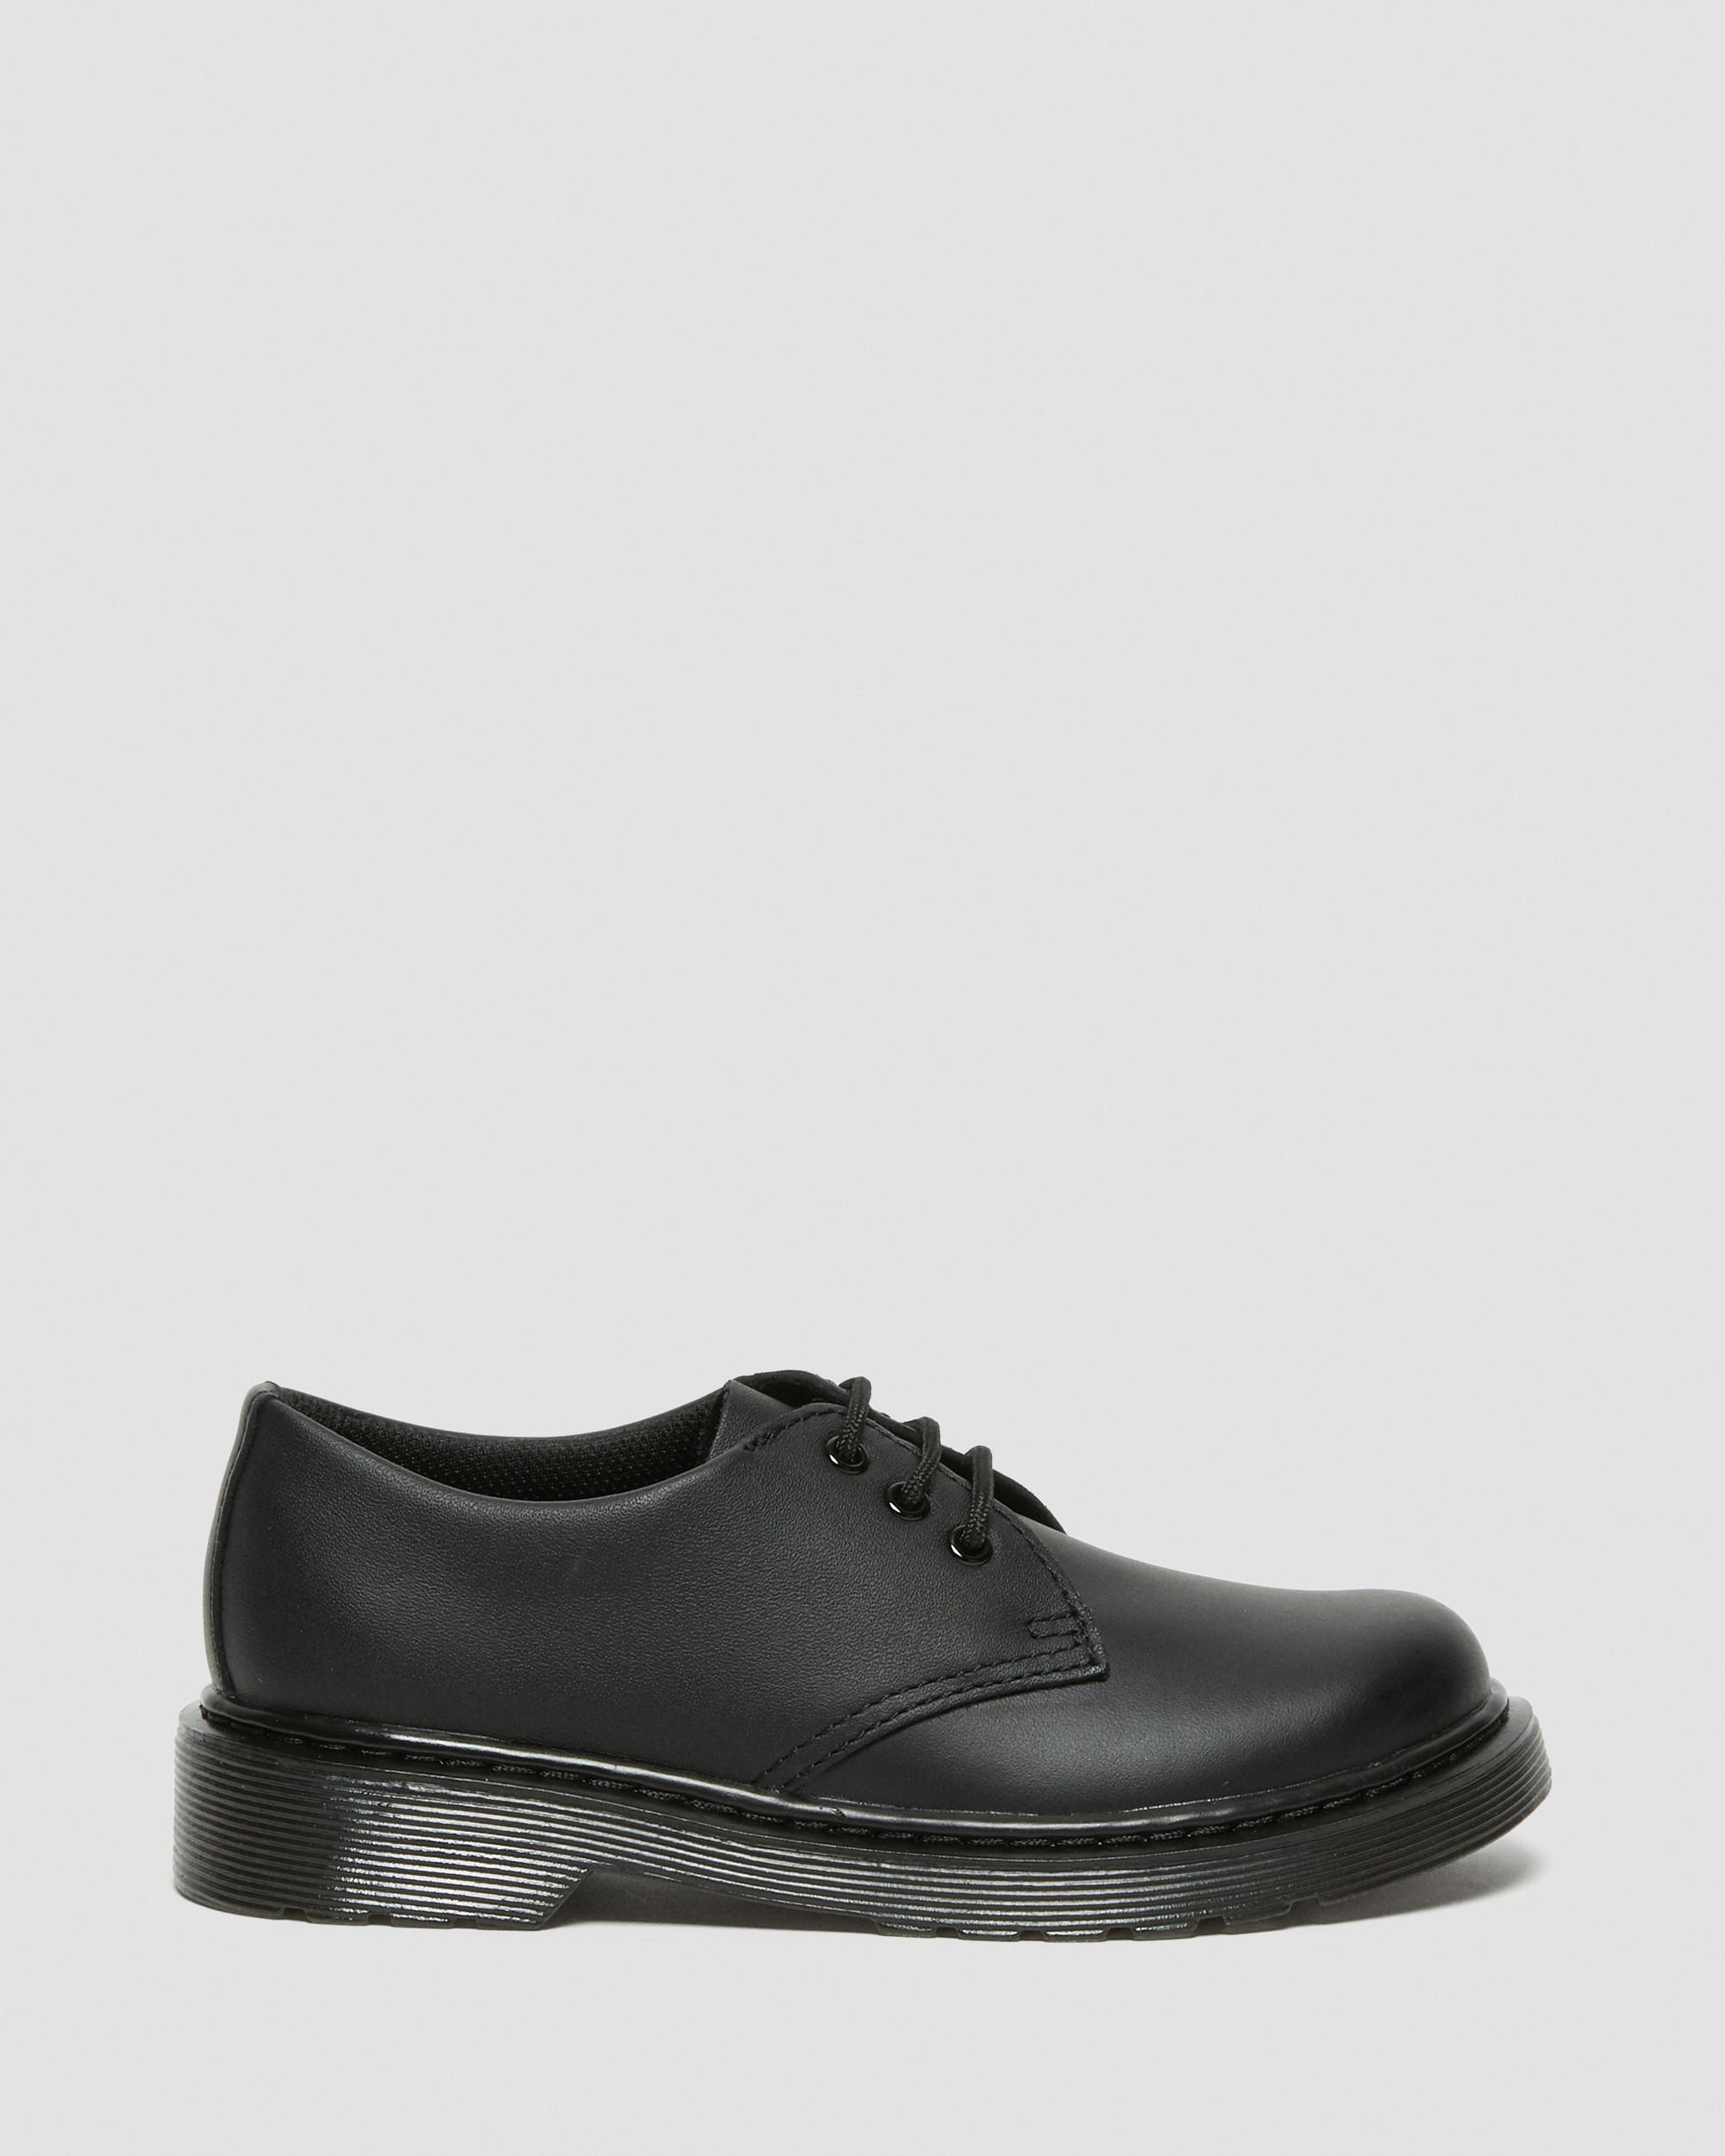 Junior 1461 Mono Softy T Leather Shoes | Dr. Martens